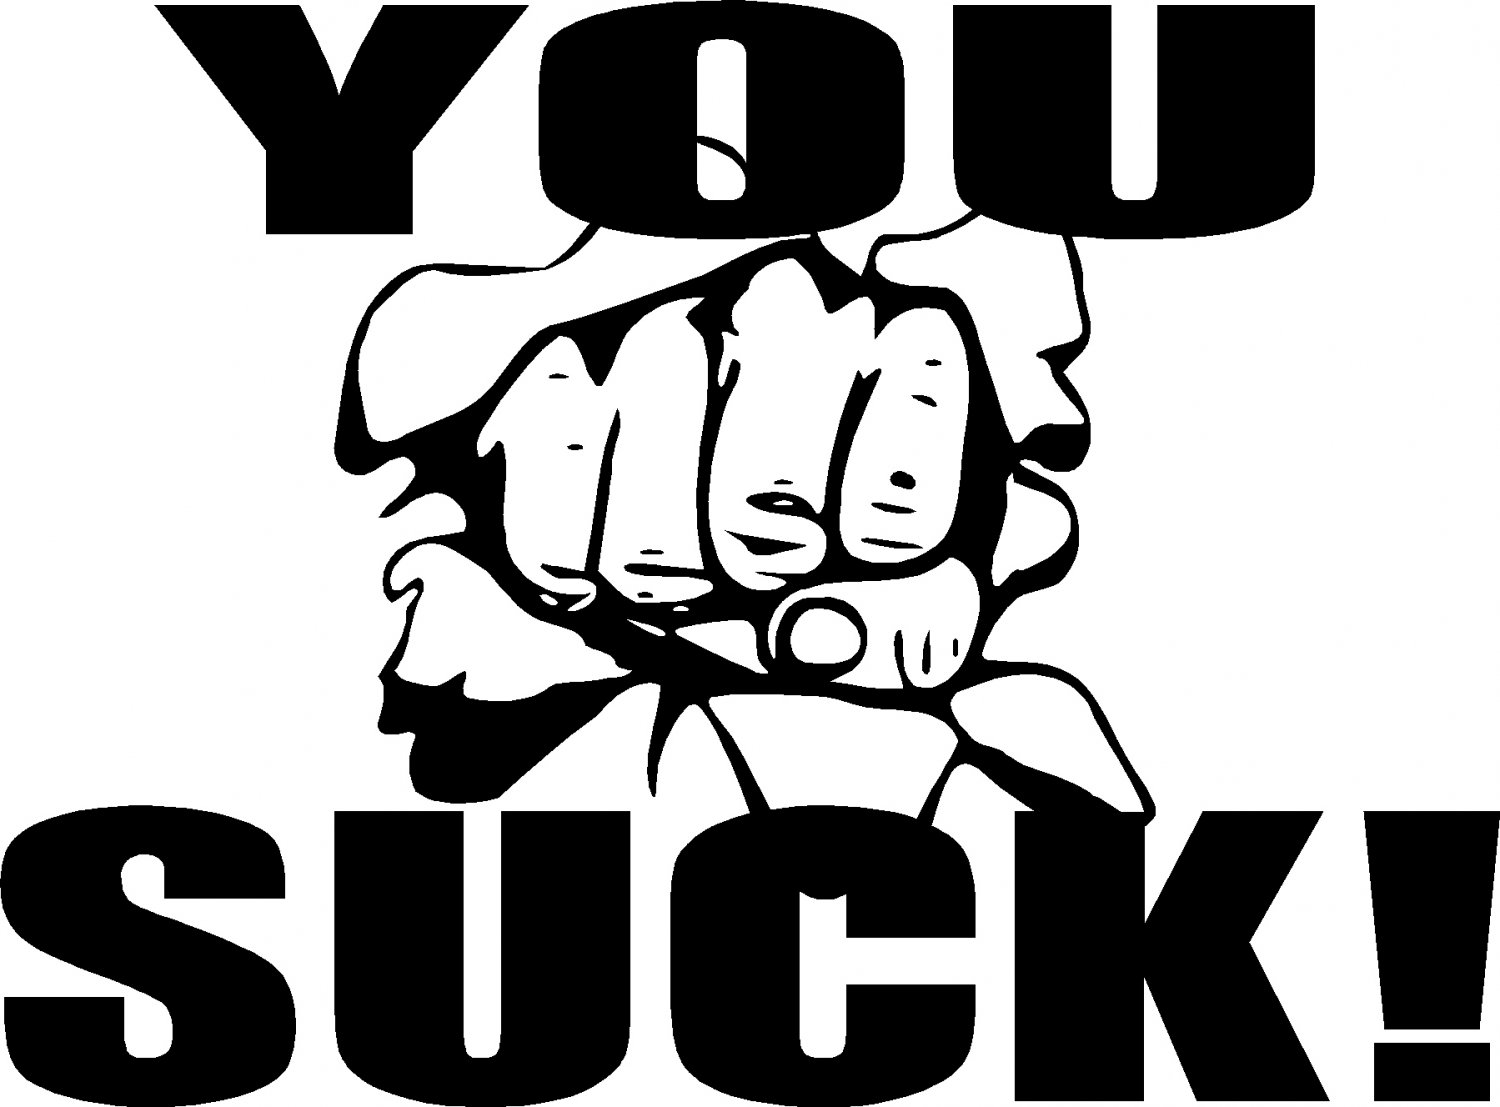 fist you suck knock out punch loser in your face vinyl decal sticker